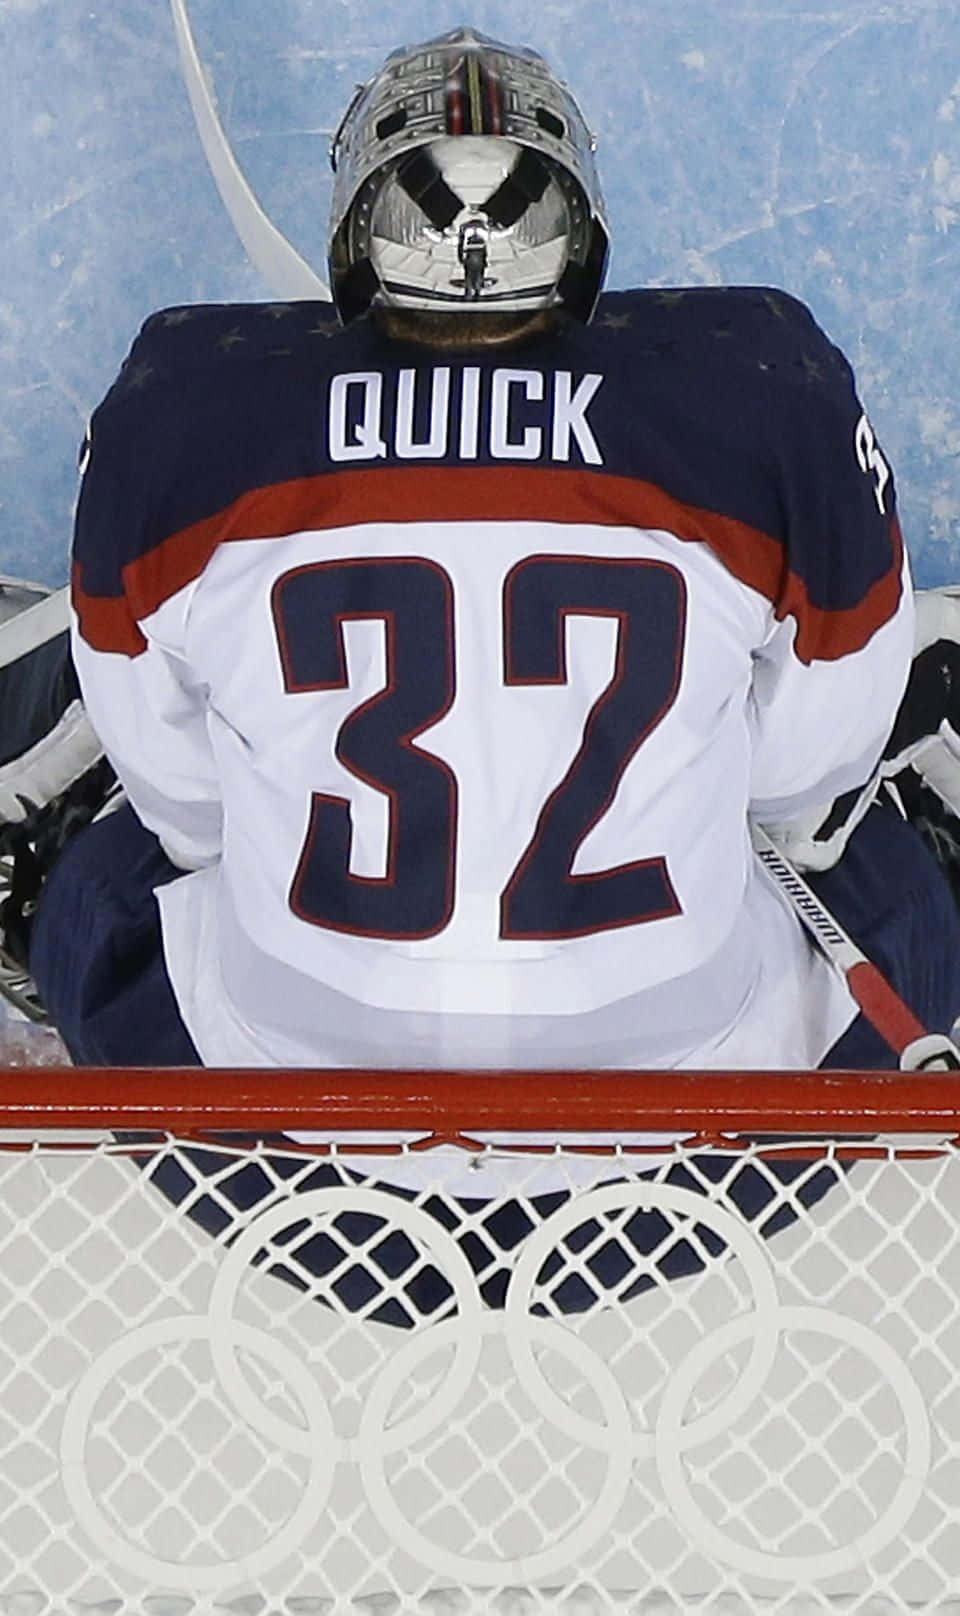 A Goalie Is Sitting On The Goal Line Wallpaper